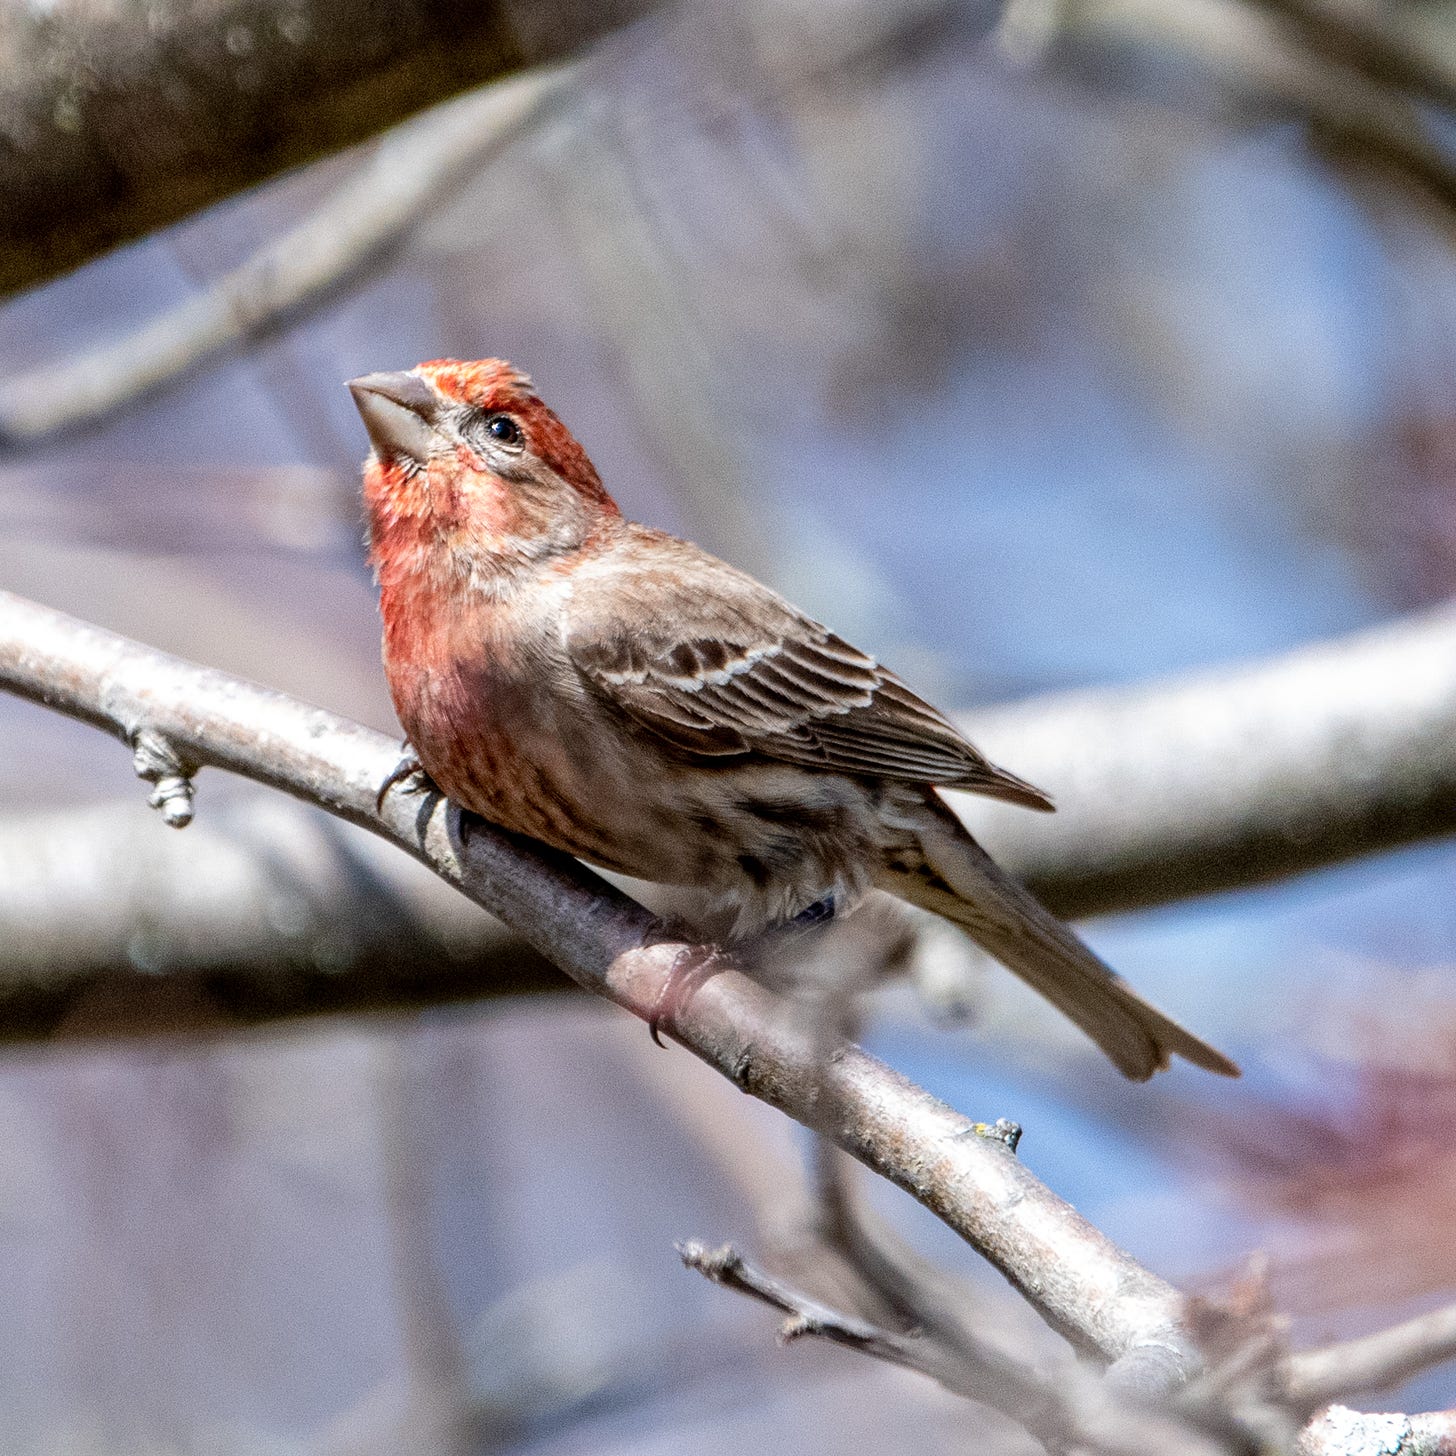 A house finch, with red crown, chin, and breast, looking up toward the sun in cobra pose